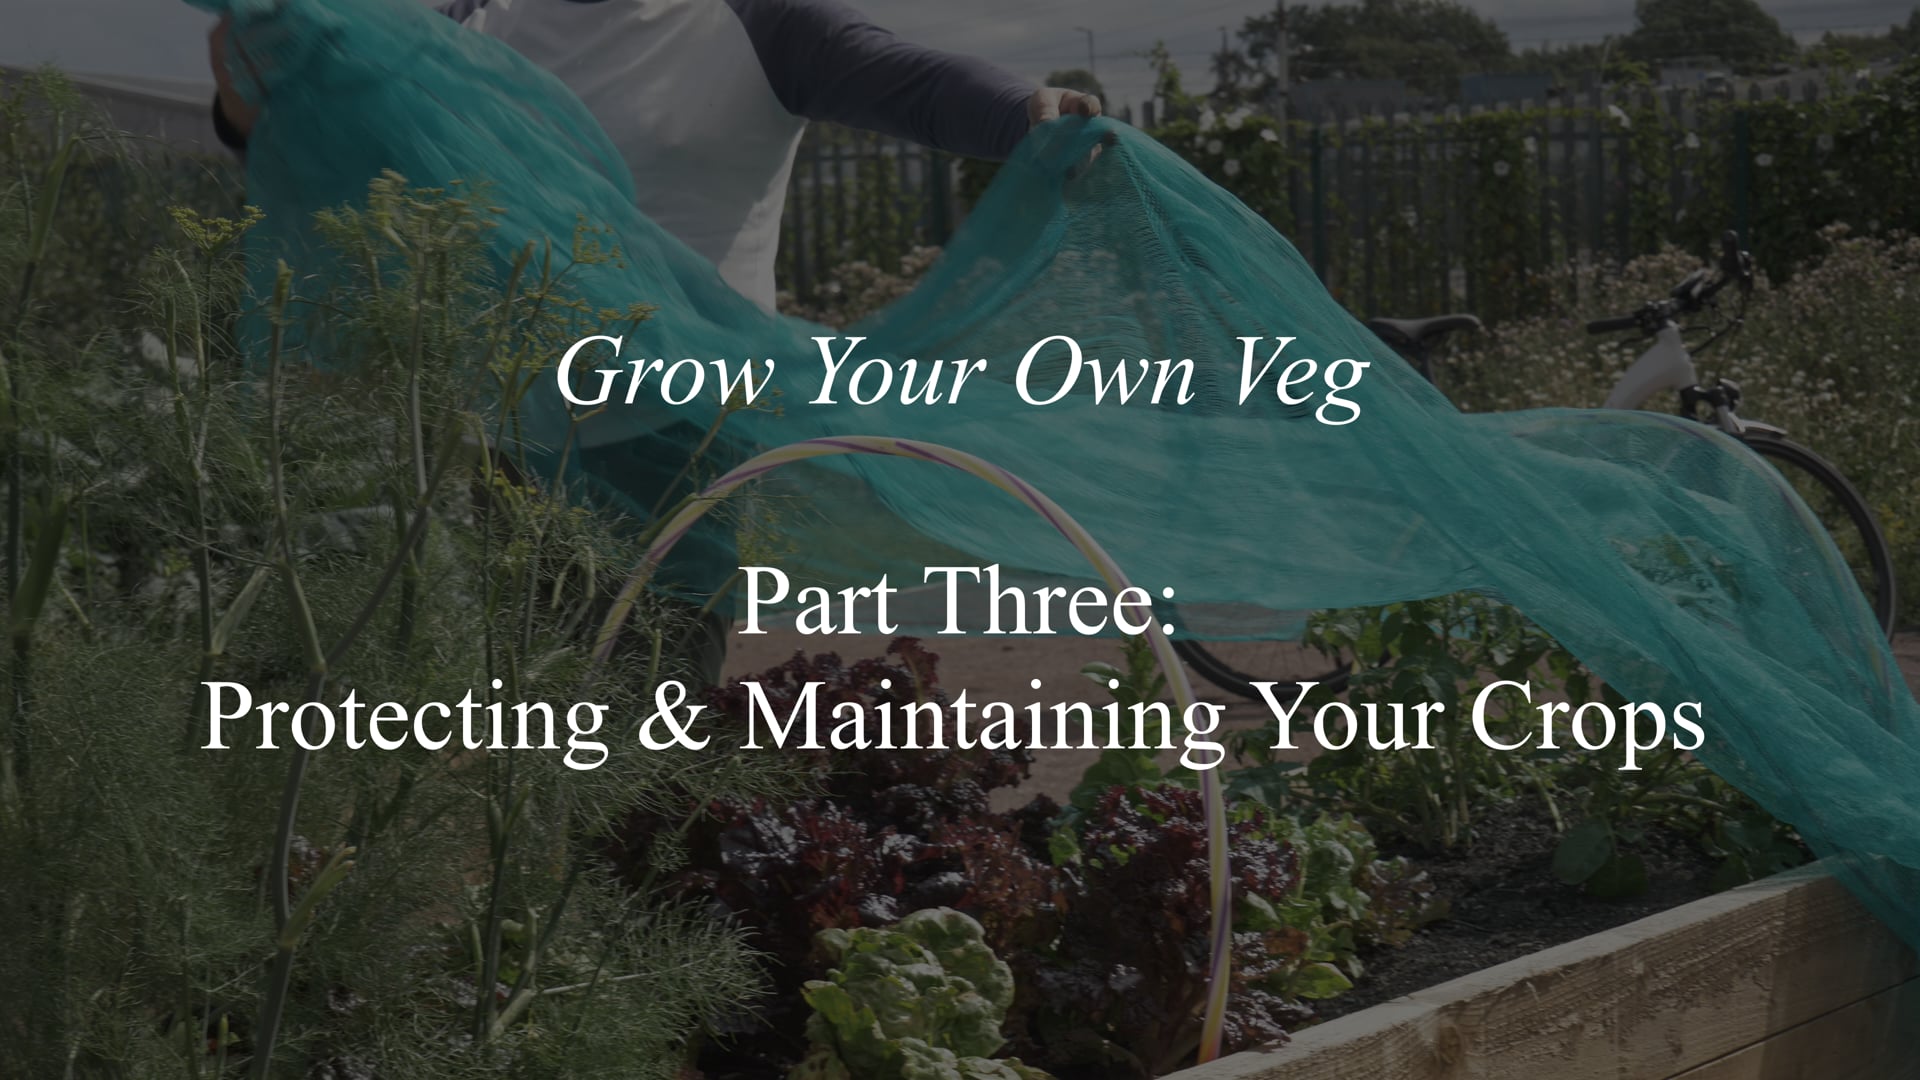 Grow Your Own Veg - pt3 Protecting & Maintaining Your Crops